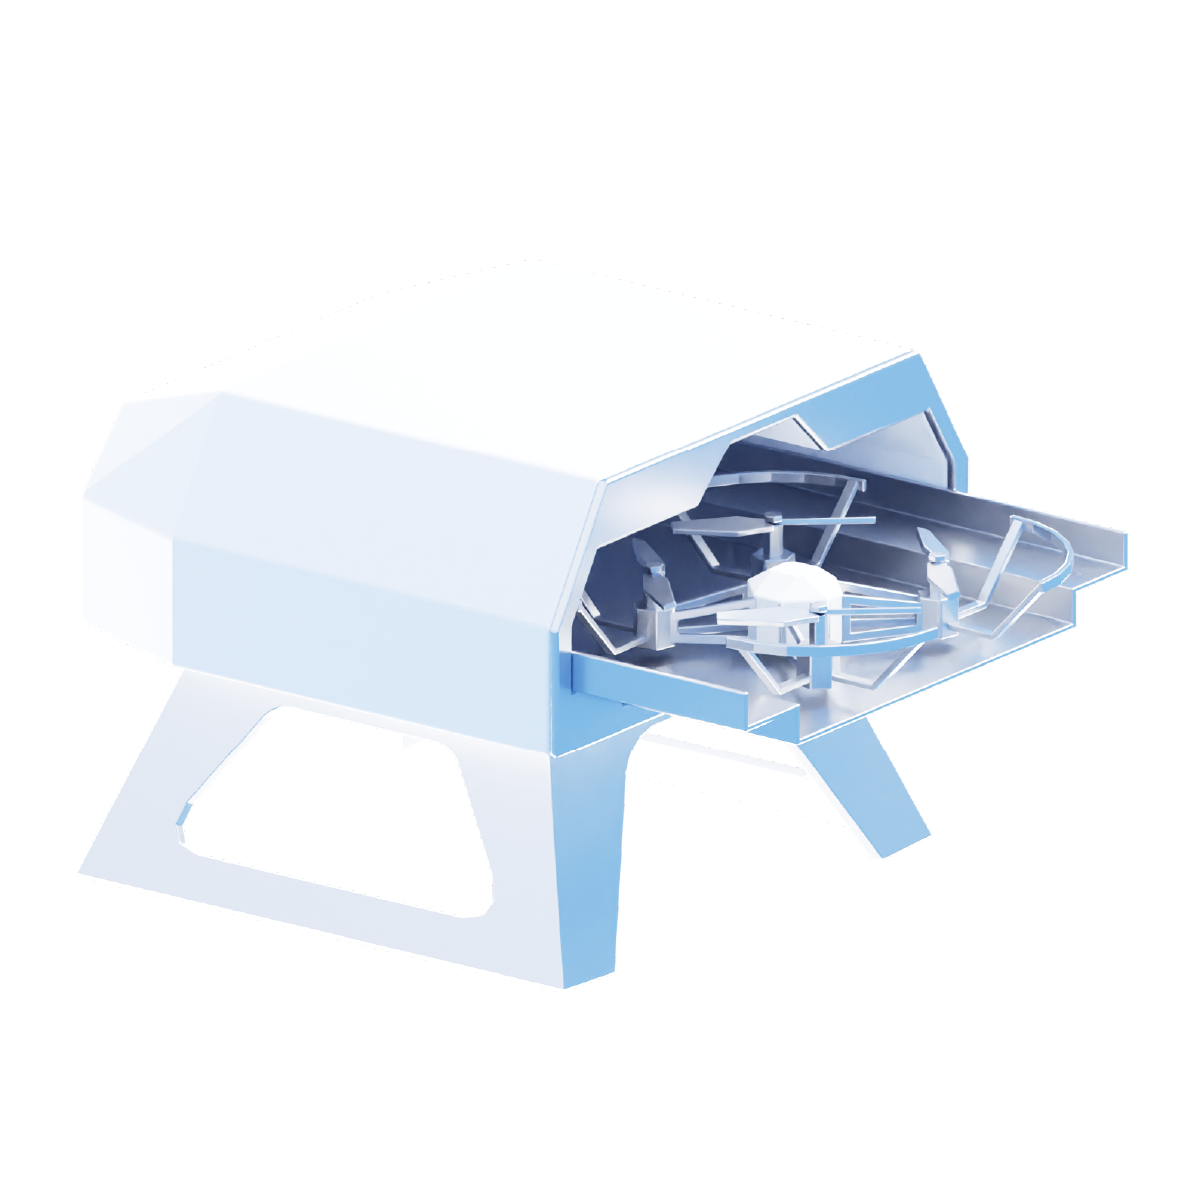 DRONE.png